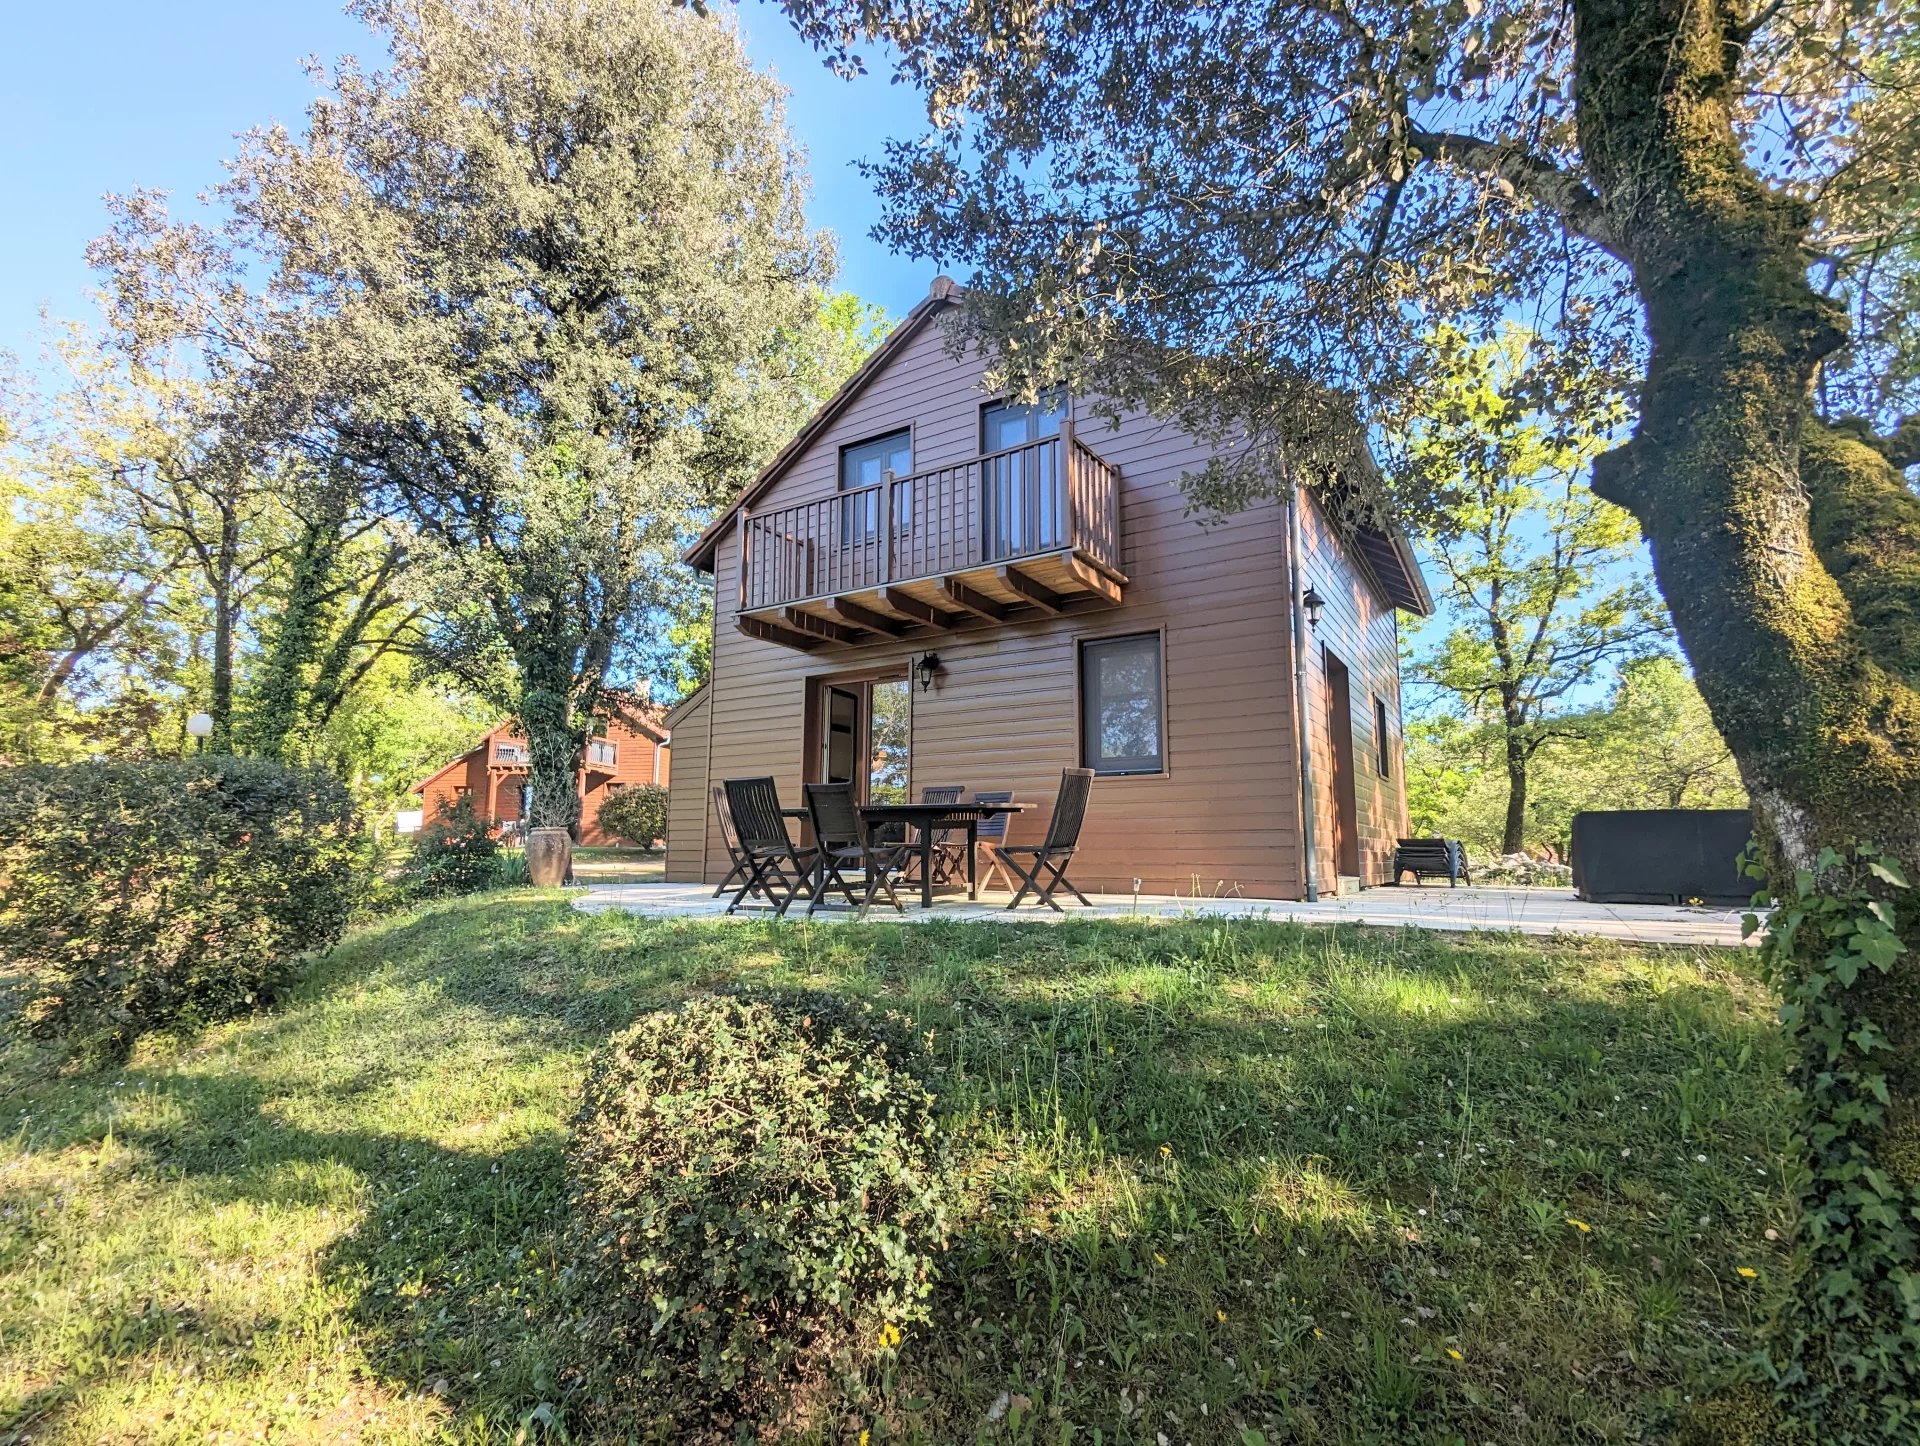 3-bedroom chalet on Dordogne golf course featuring an open-plan layout, fully equipped kitchen, woodburner, and three double bedrooms.